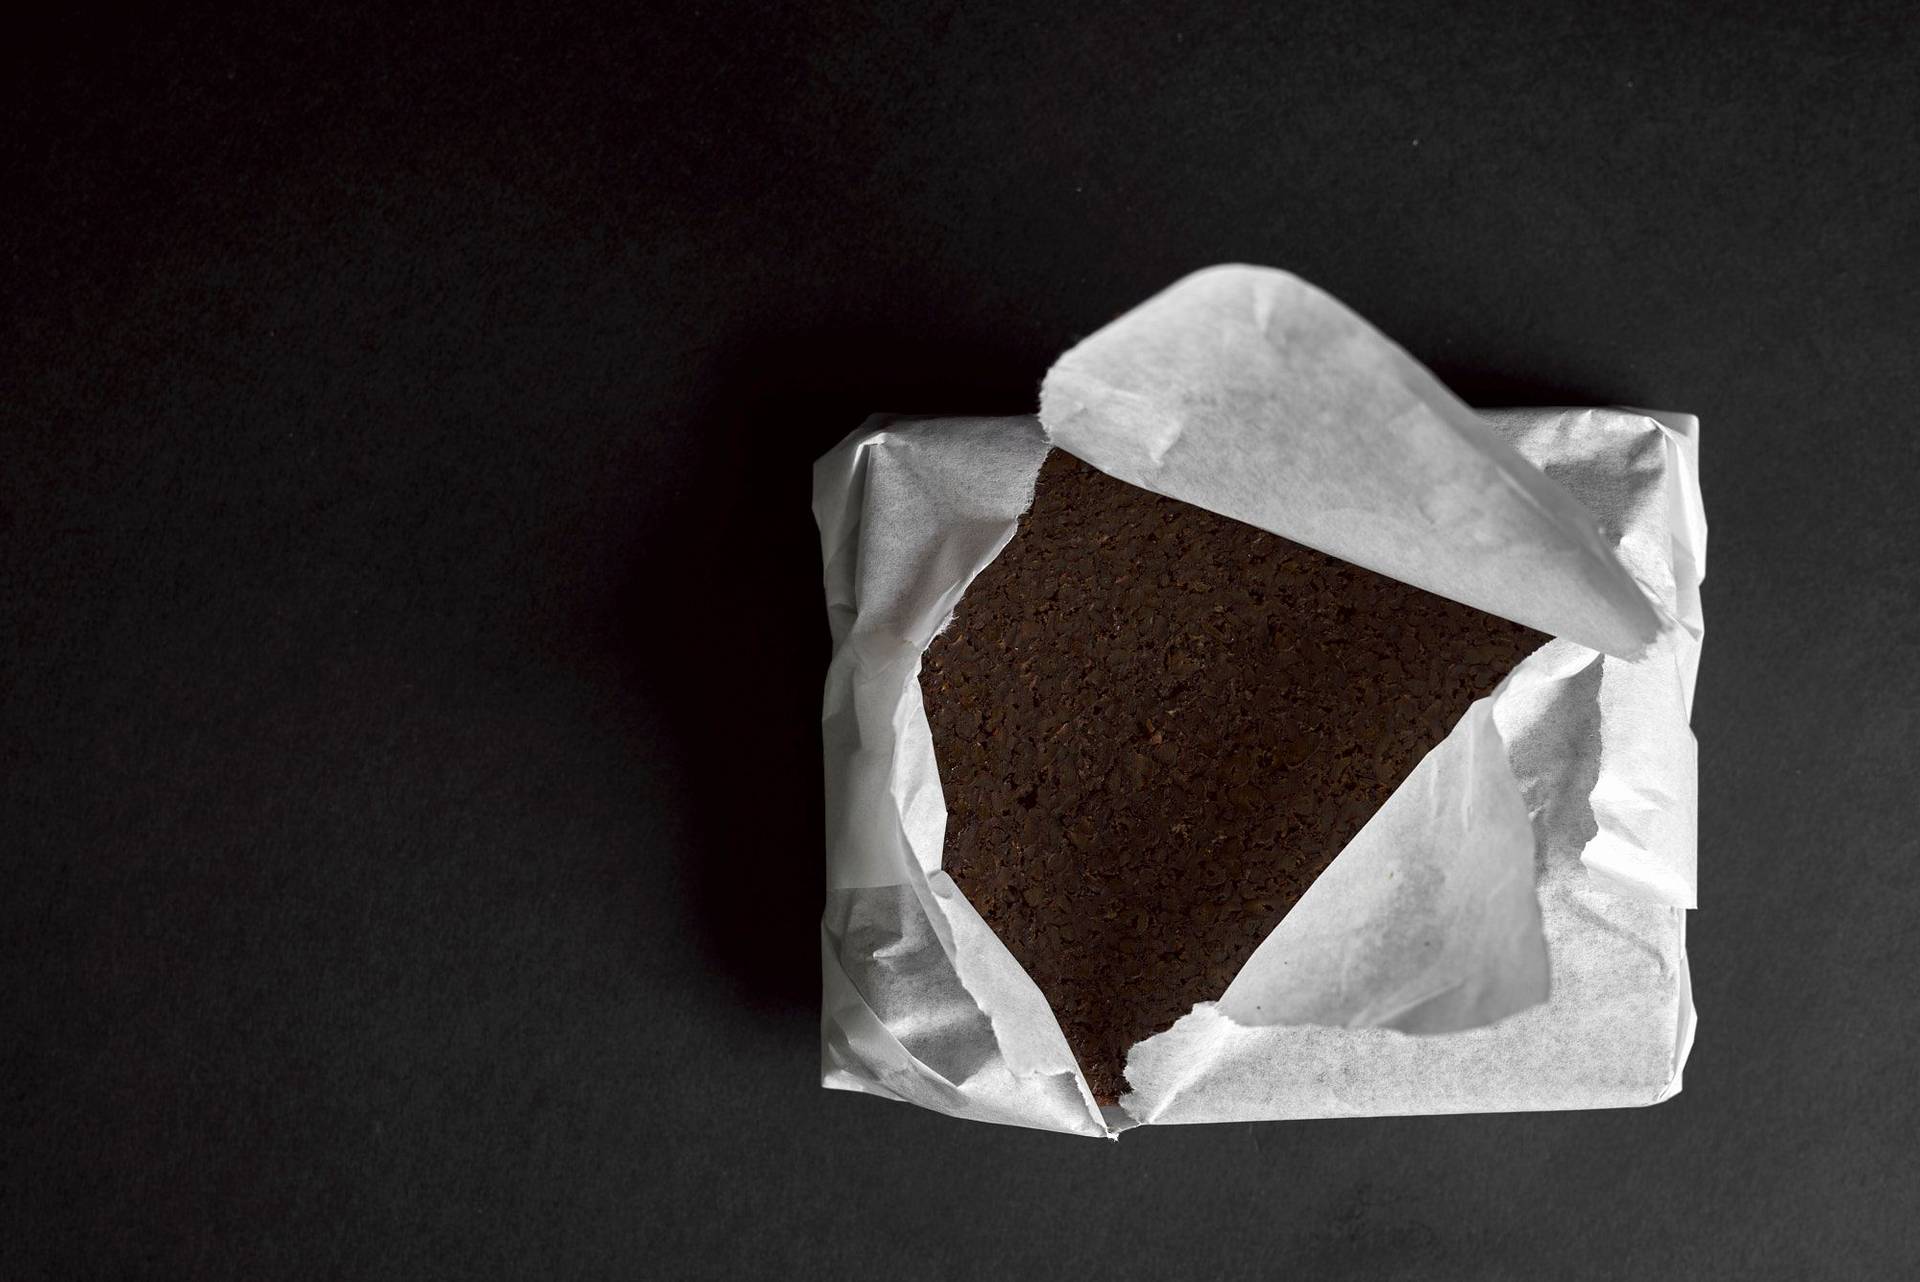 pumpernickel bread wrapped in paper with black background